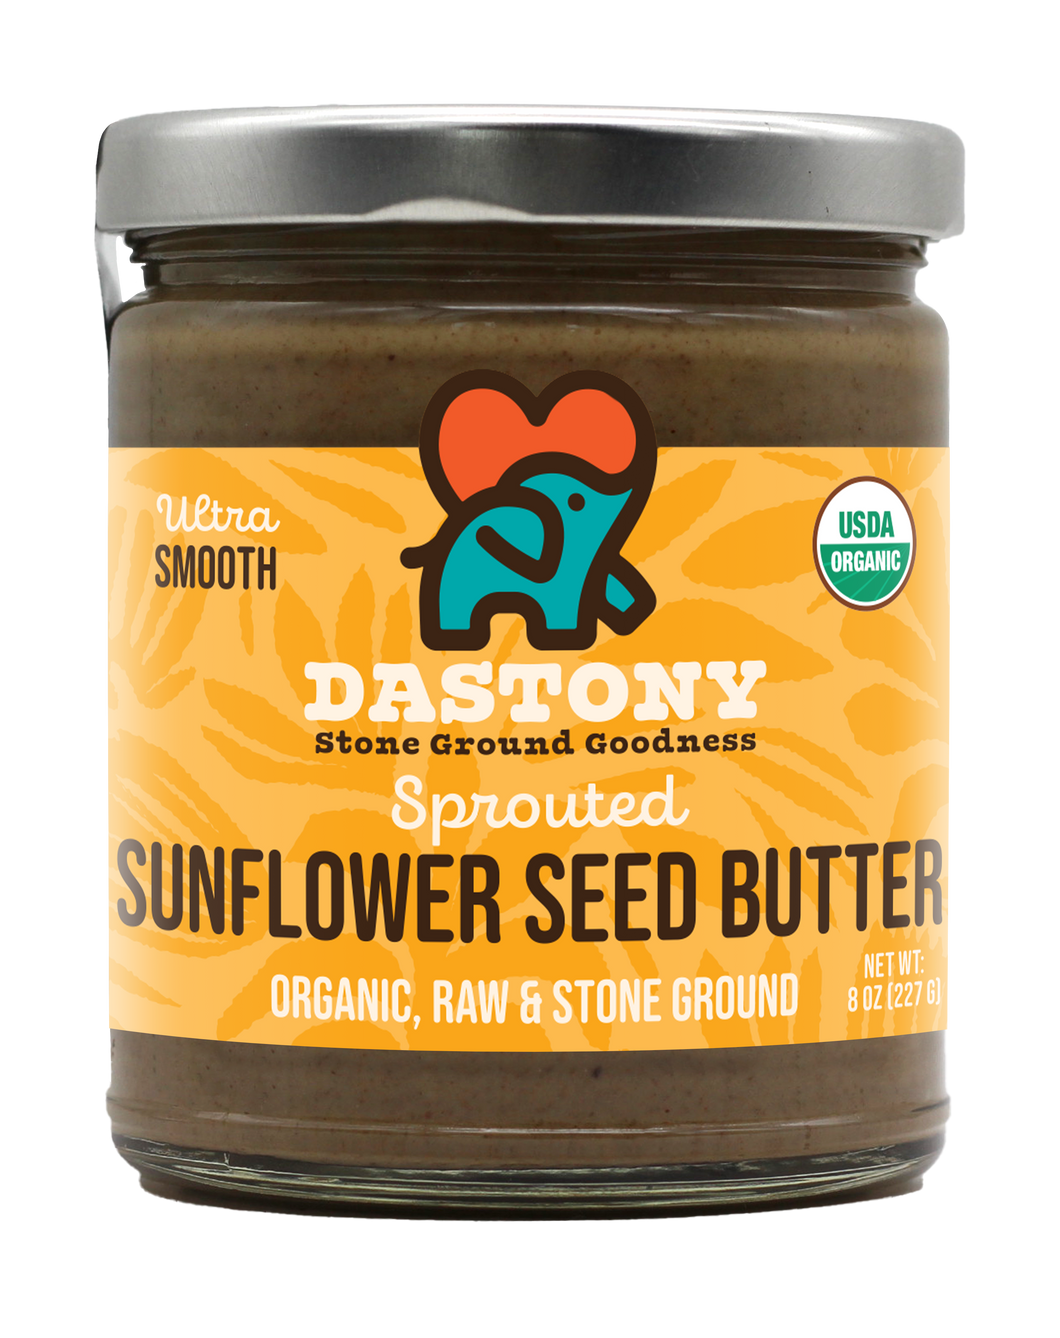 Sprouted Sunflower Seed Butter